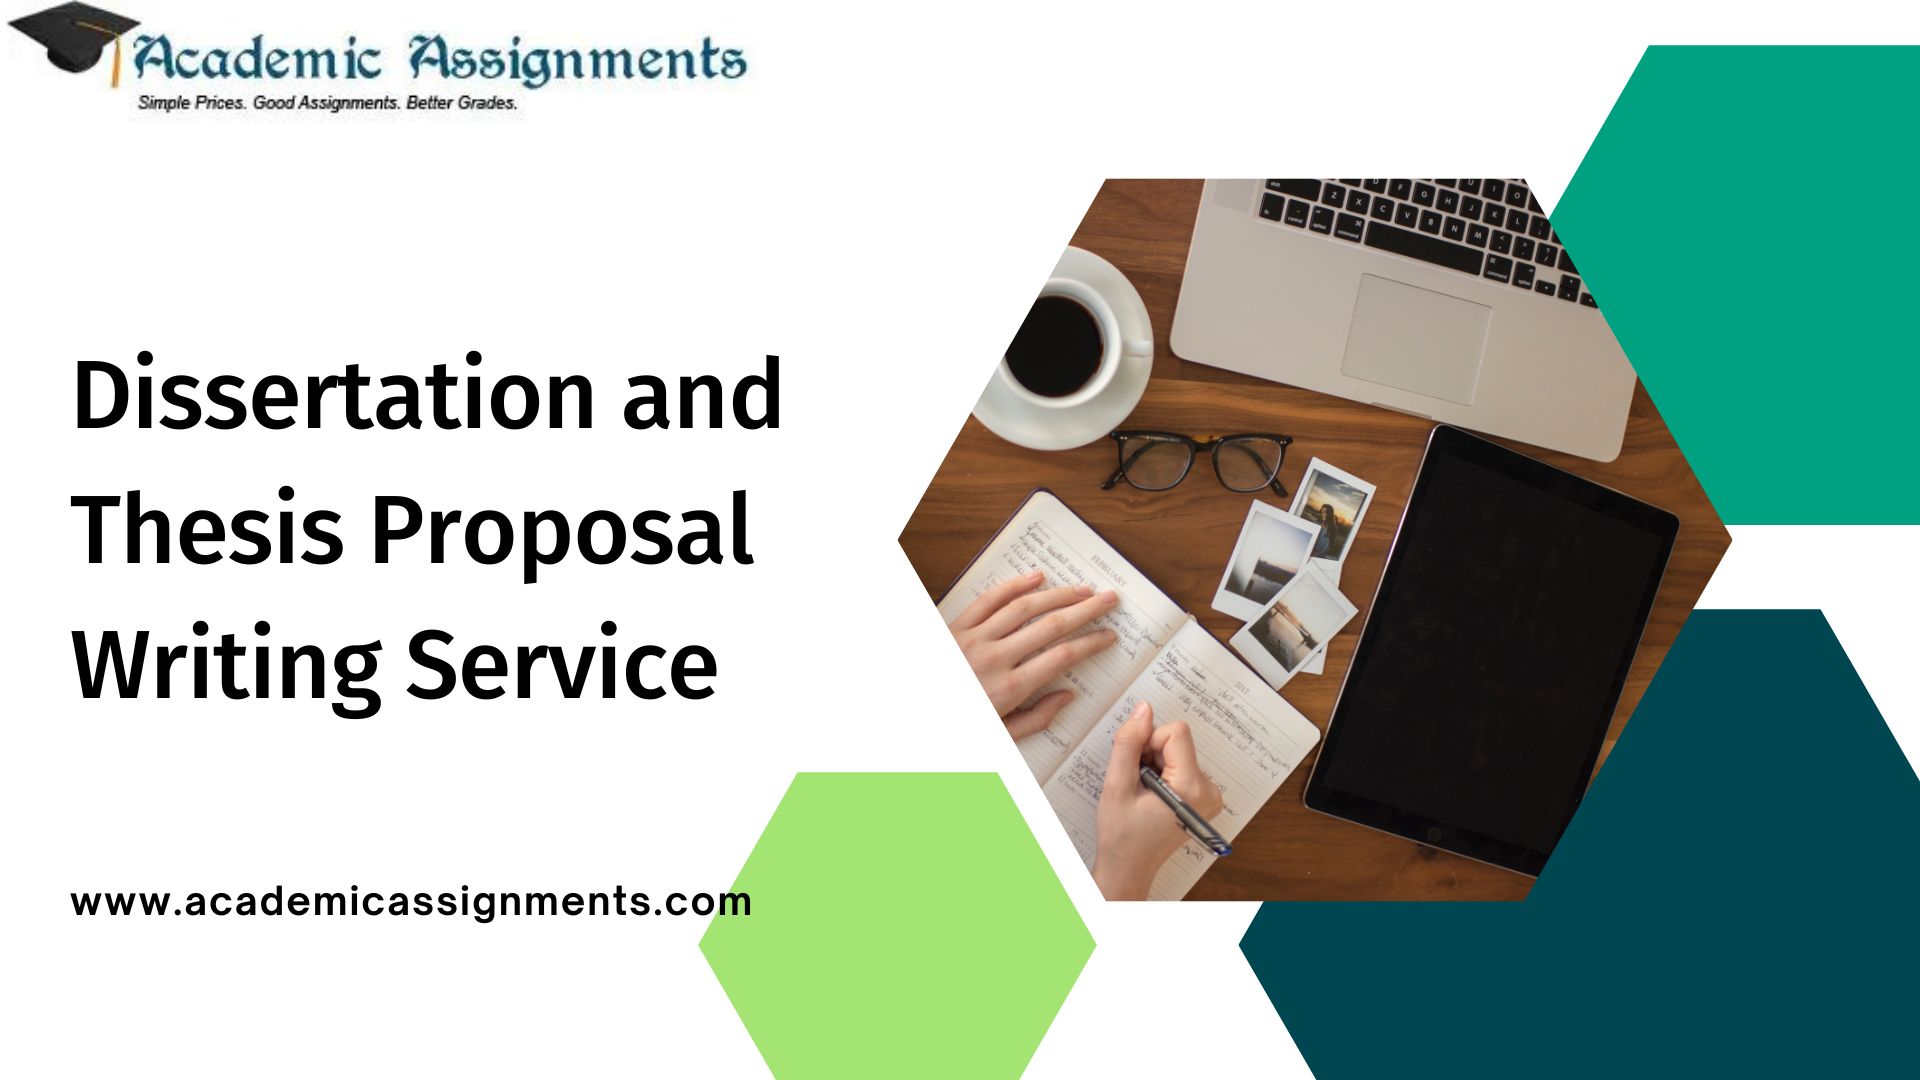 Dissertation and thesis proposal writing service